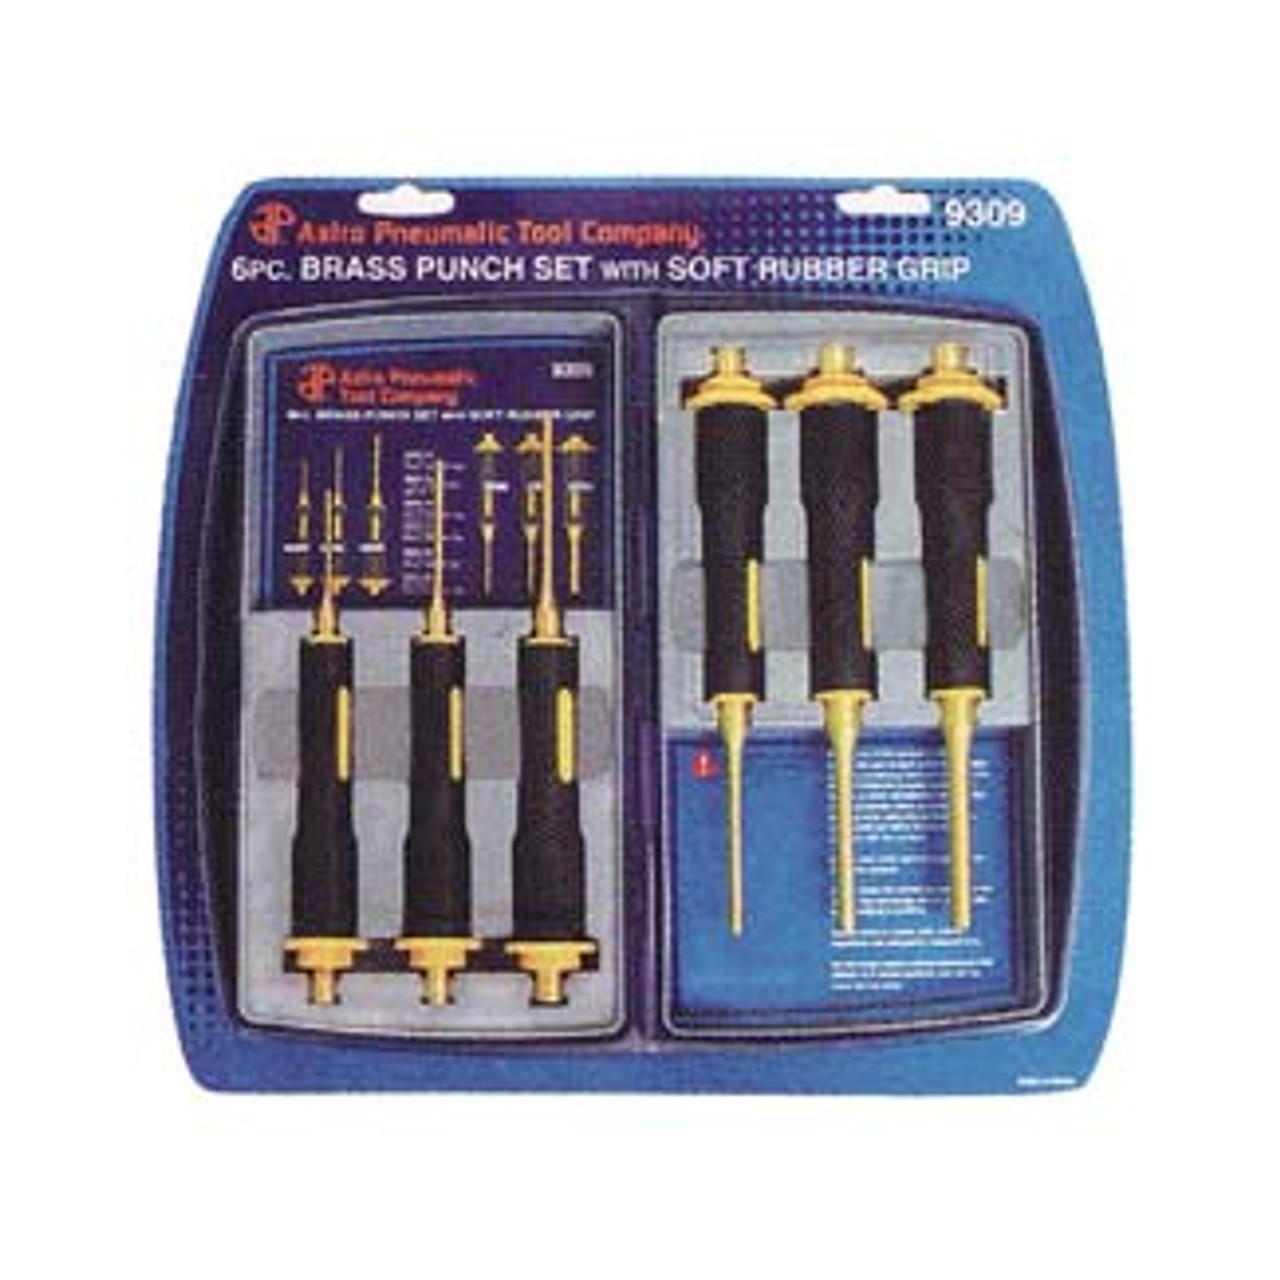 6pc. Brass Punch Set with Soft Rubber Grip